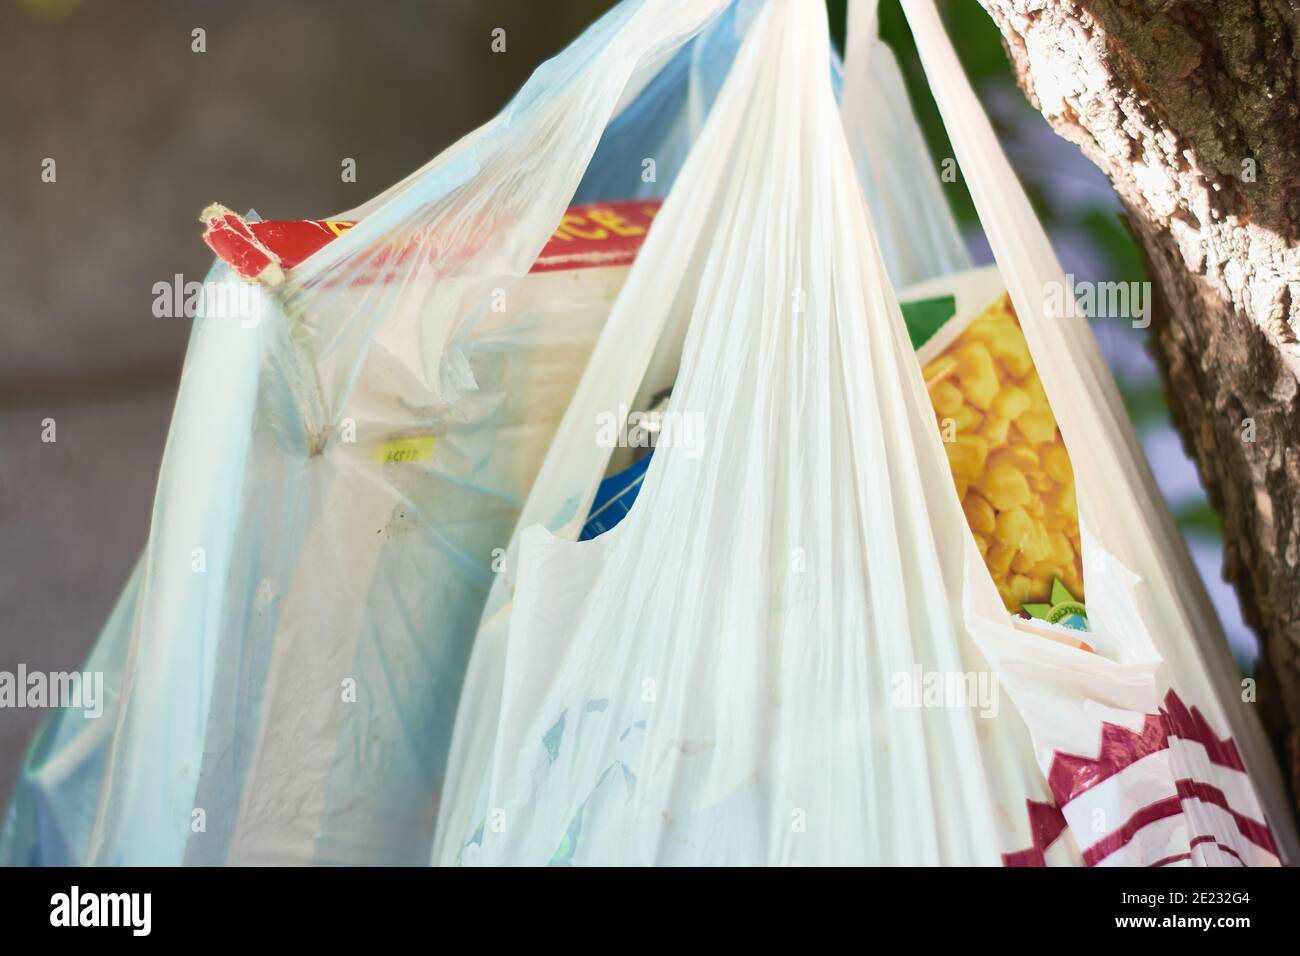 White plastic bags full of trash hanging from tree waiting to be collected by the garbage collector. Concept of environmental pollution. Stock Photo